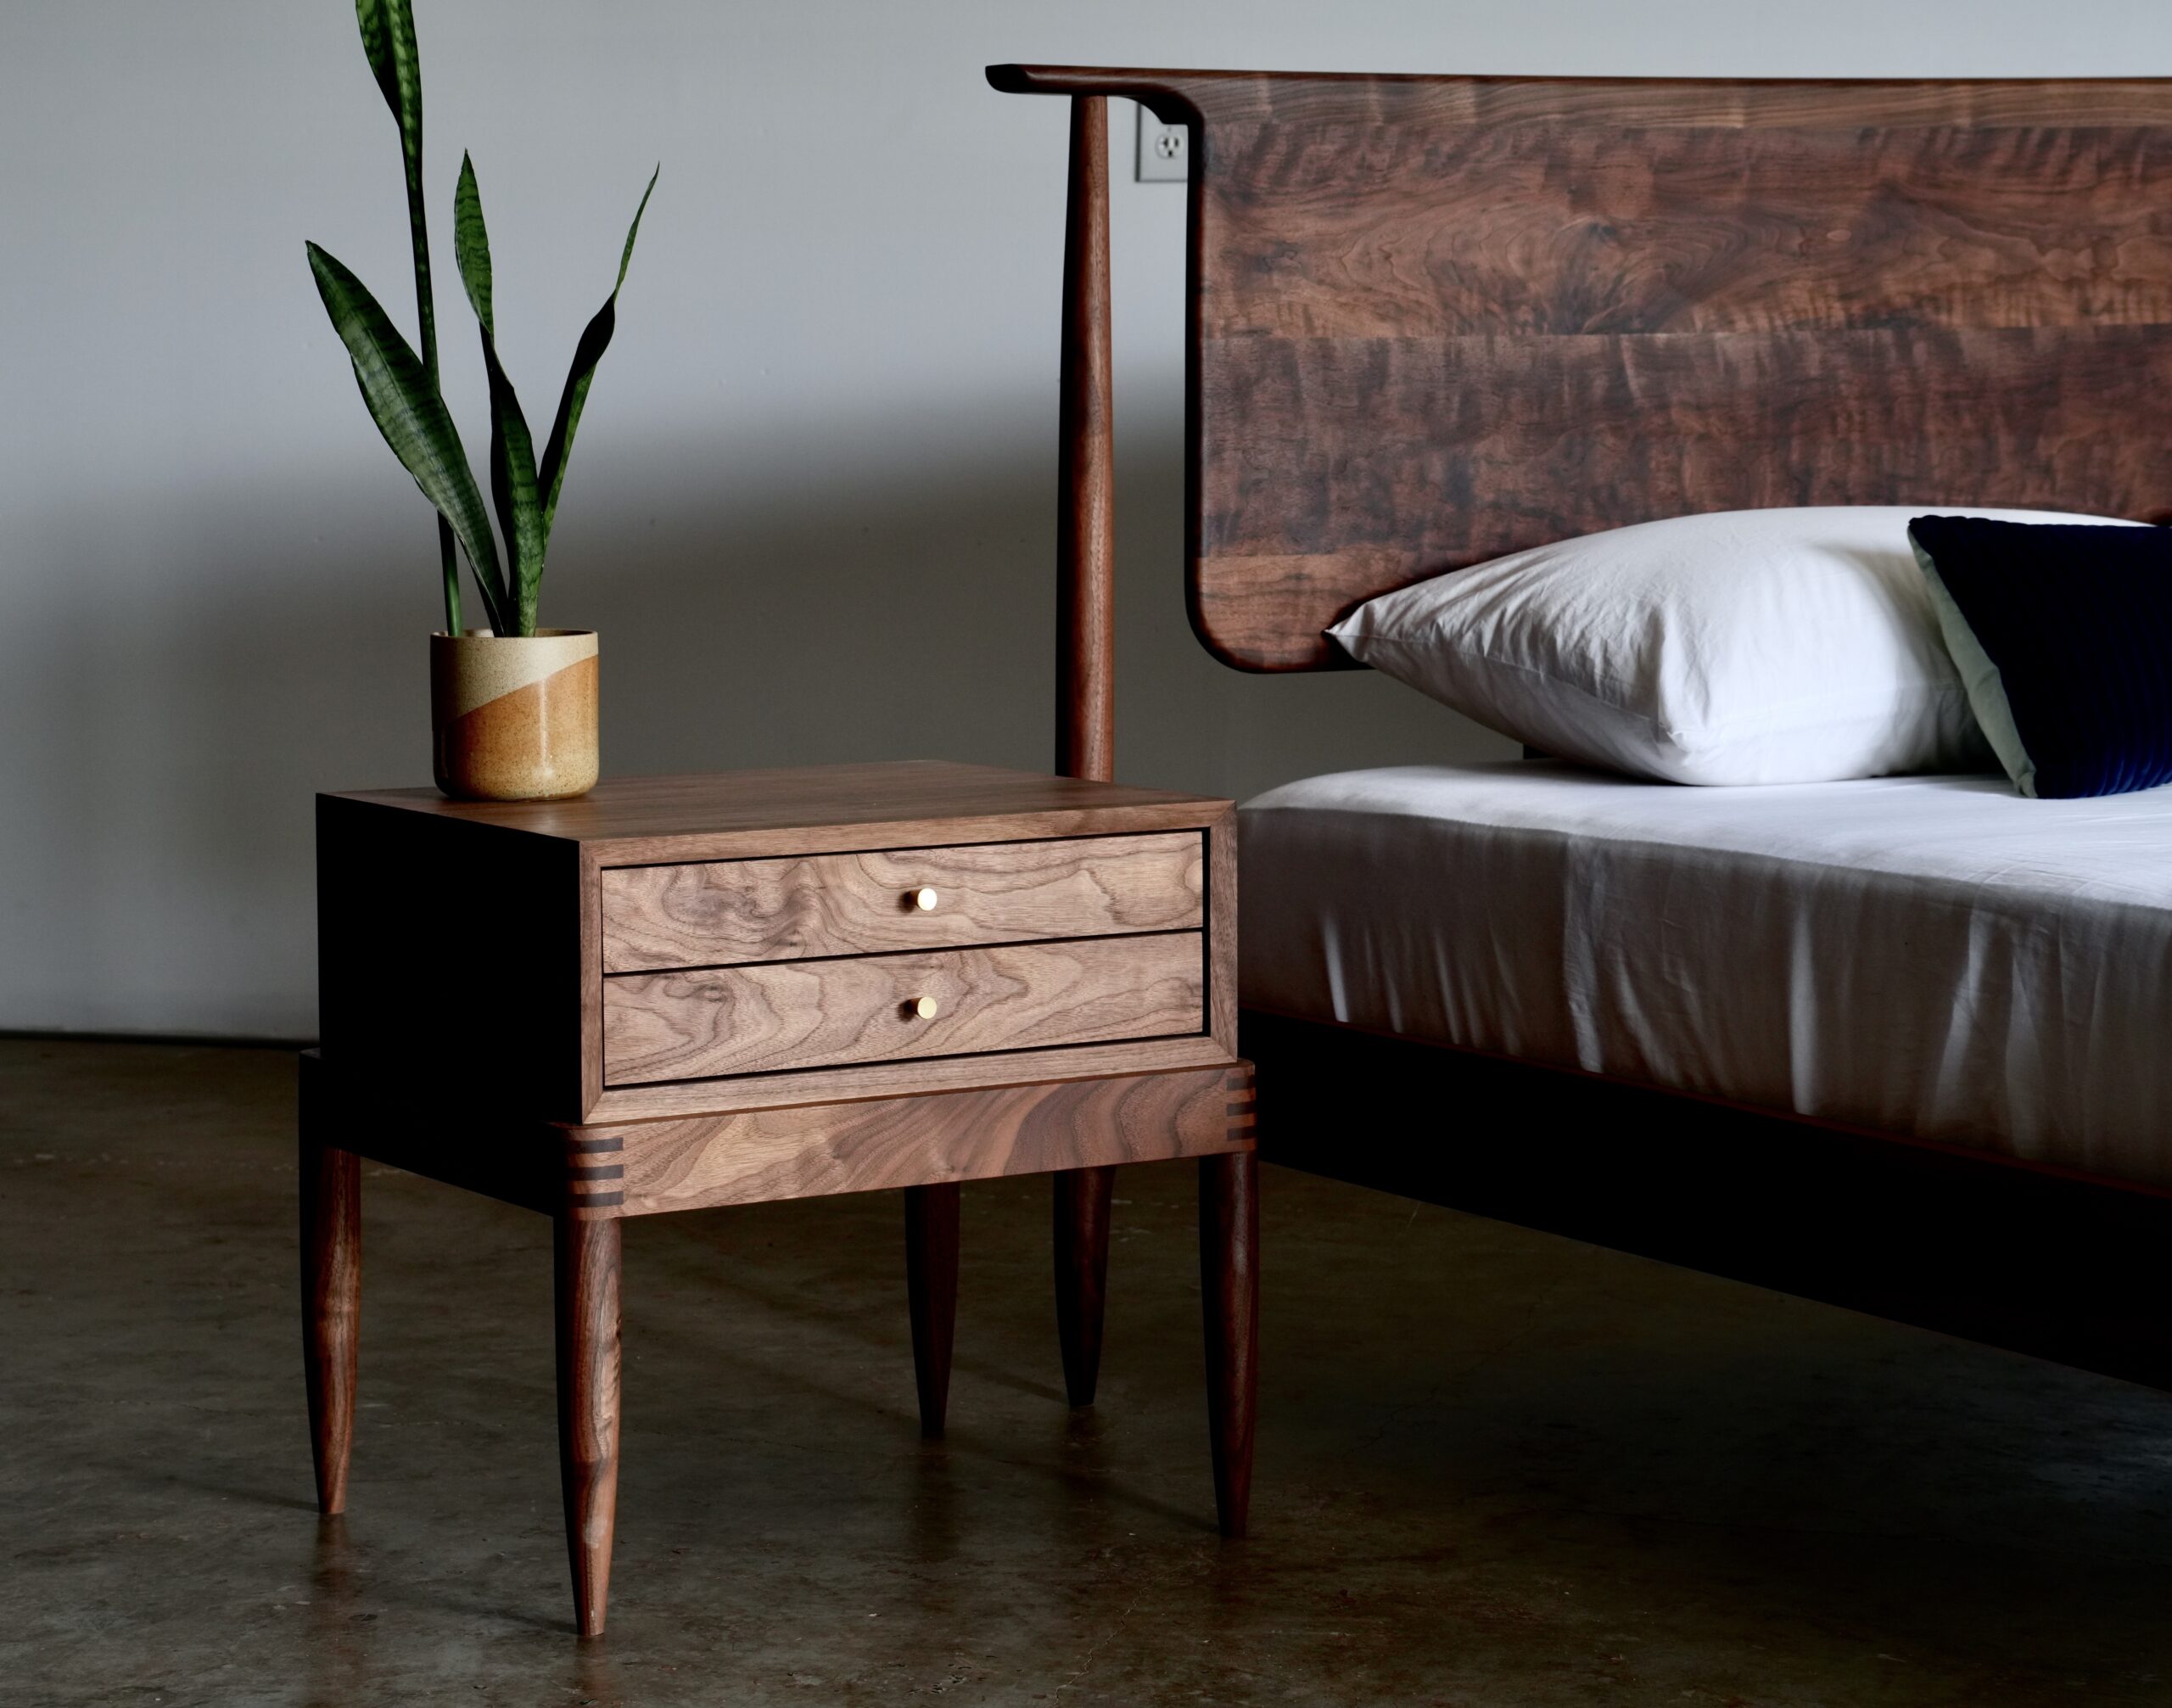 A midcentury modern bed with a figured walnut headboard next to a matching nightstand